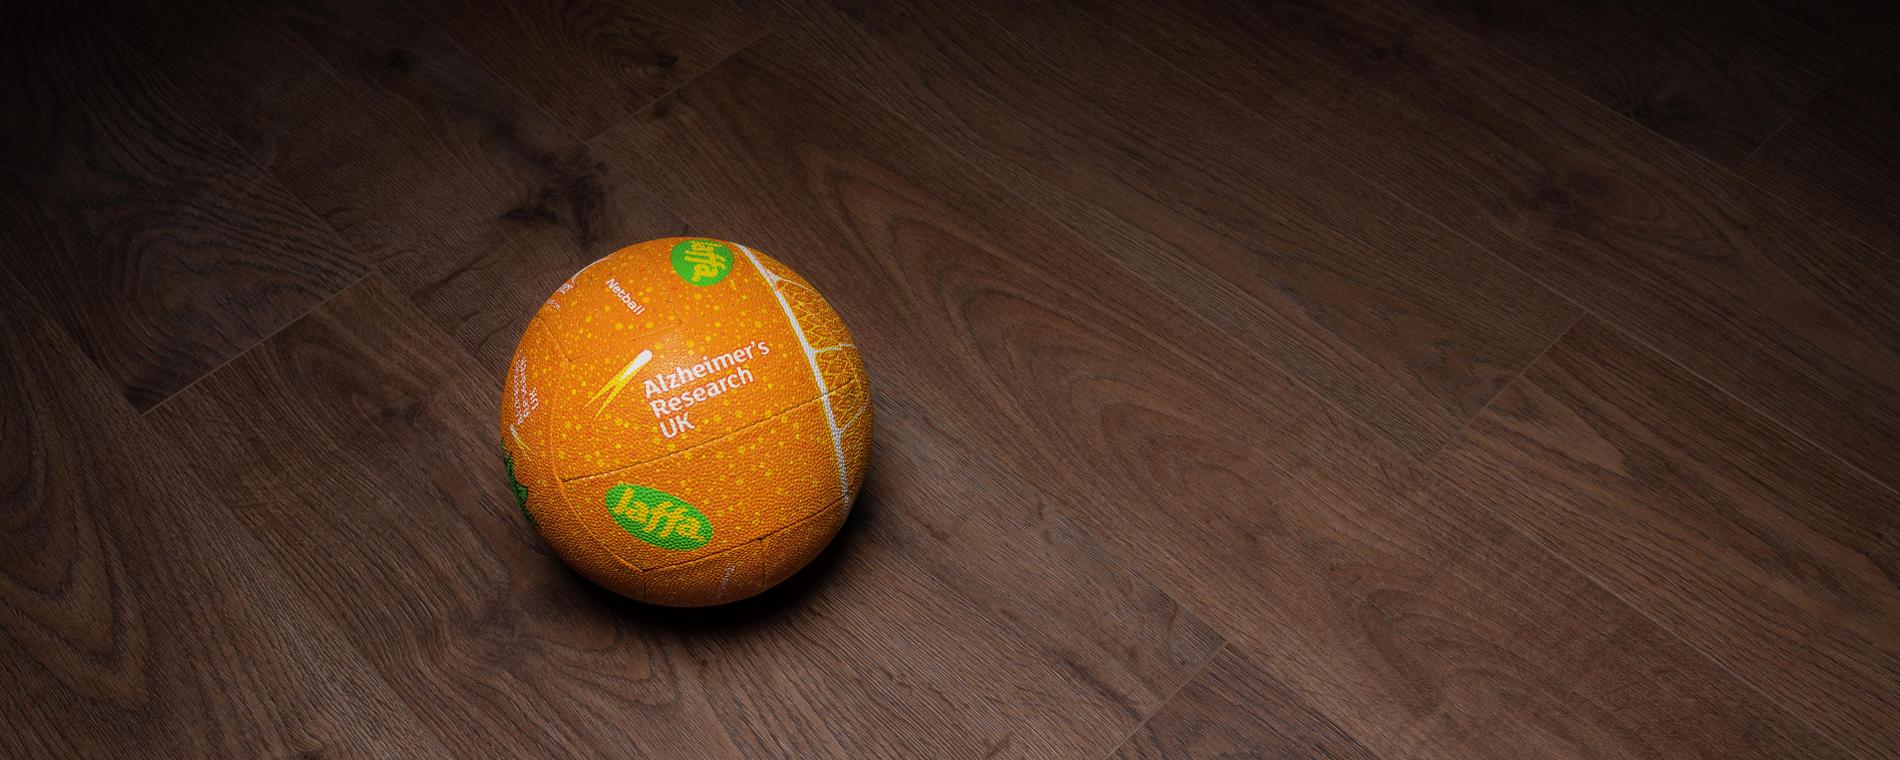 GILBERT PARTNER WITH ALZHEIMER'S RESEARCH UK TO RELEASE LIMITED EDITION NETBALL